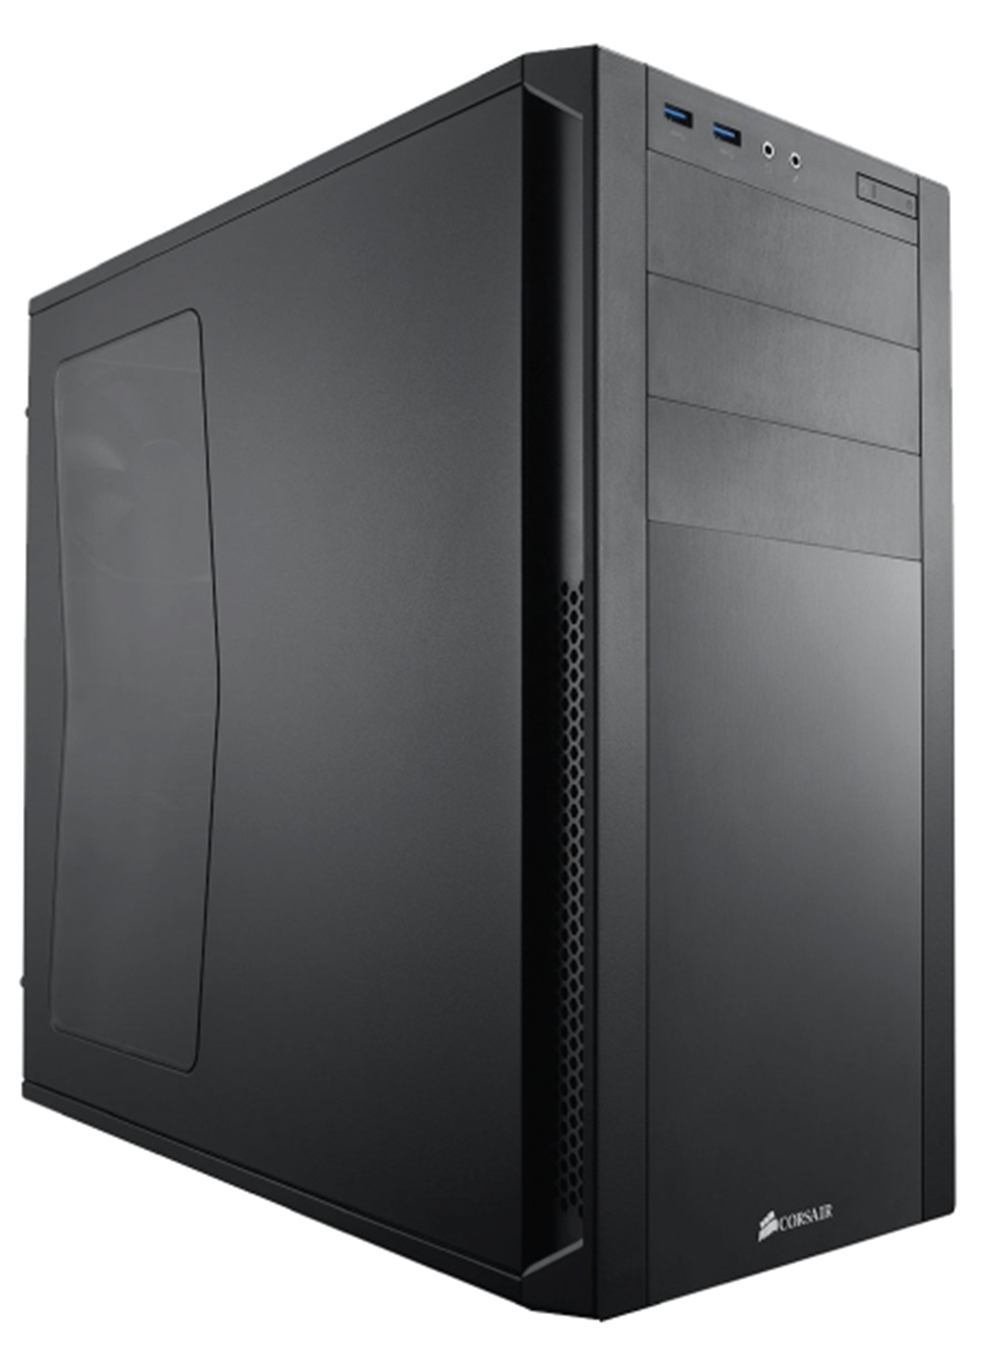 Corsair Carbide Series 200R Compact ATX Case with Window, A compact, builder-friendly case designed